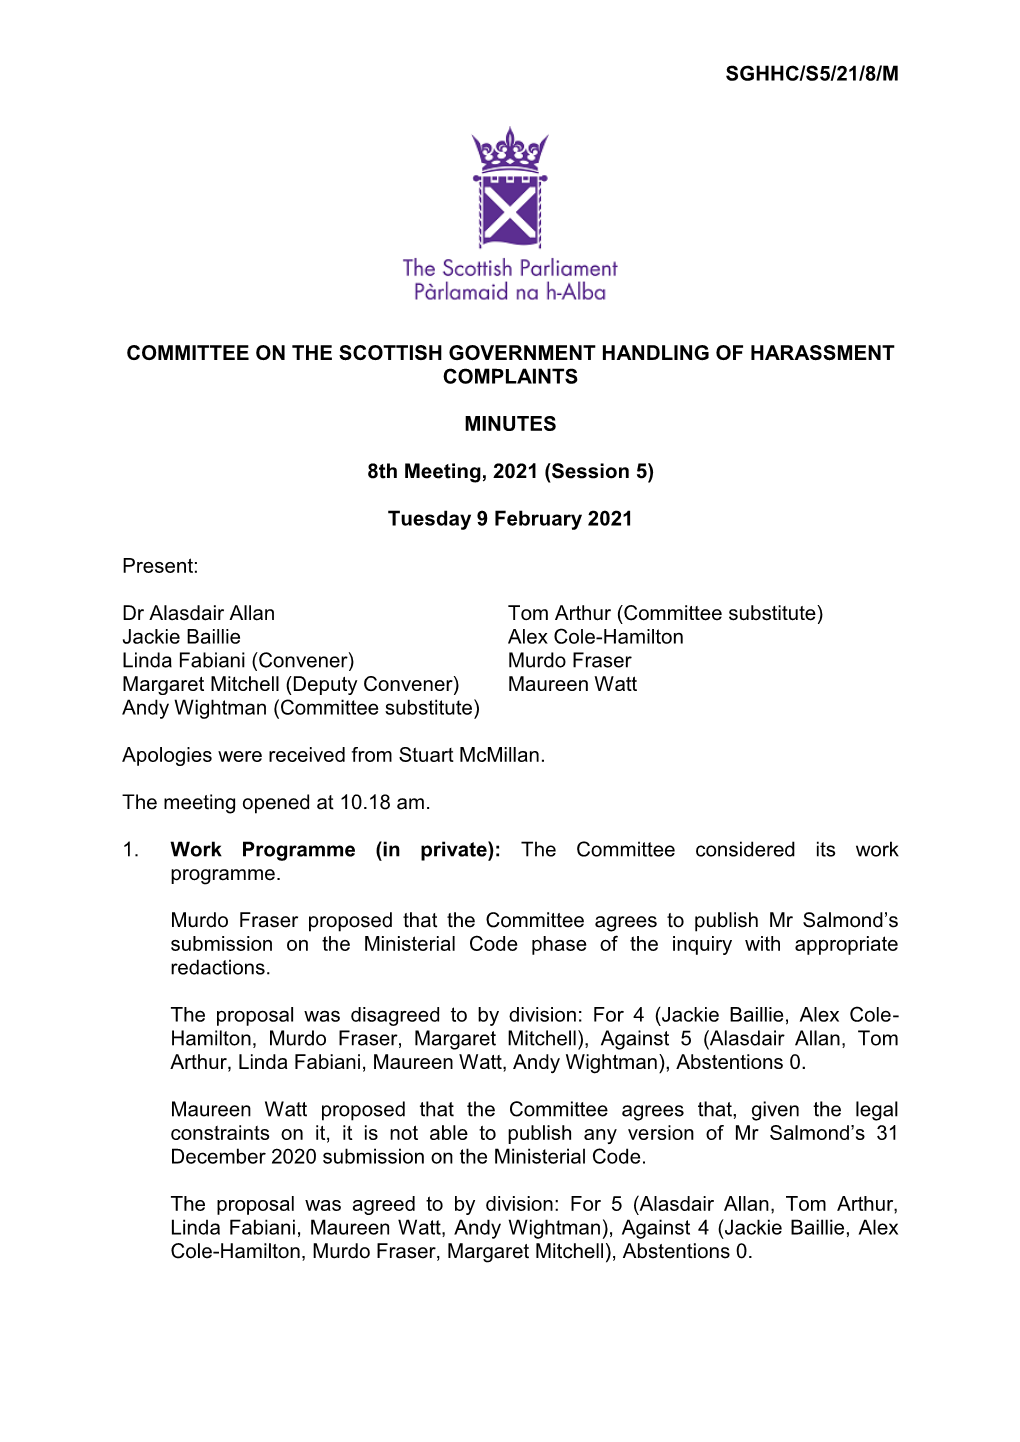 SGHHC/S5/21/8/M COMMITTEE on the SCOTTISH GOVERNMENT HANDLING of HARASSMENT COMPLAINTS MINUTES 8Th Meeting, 2021 (Session 5)